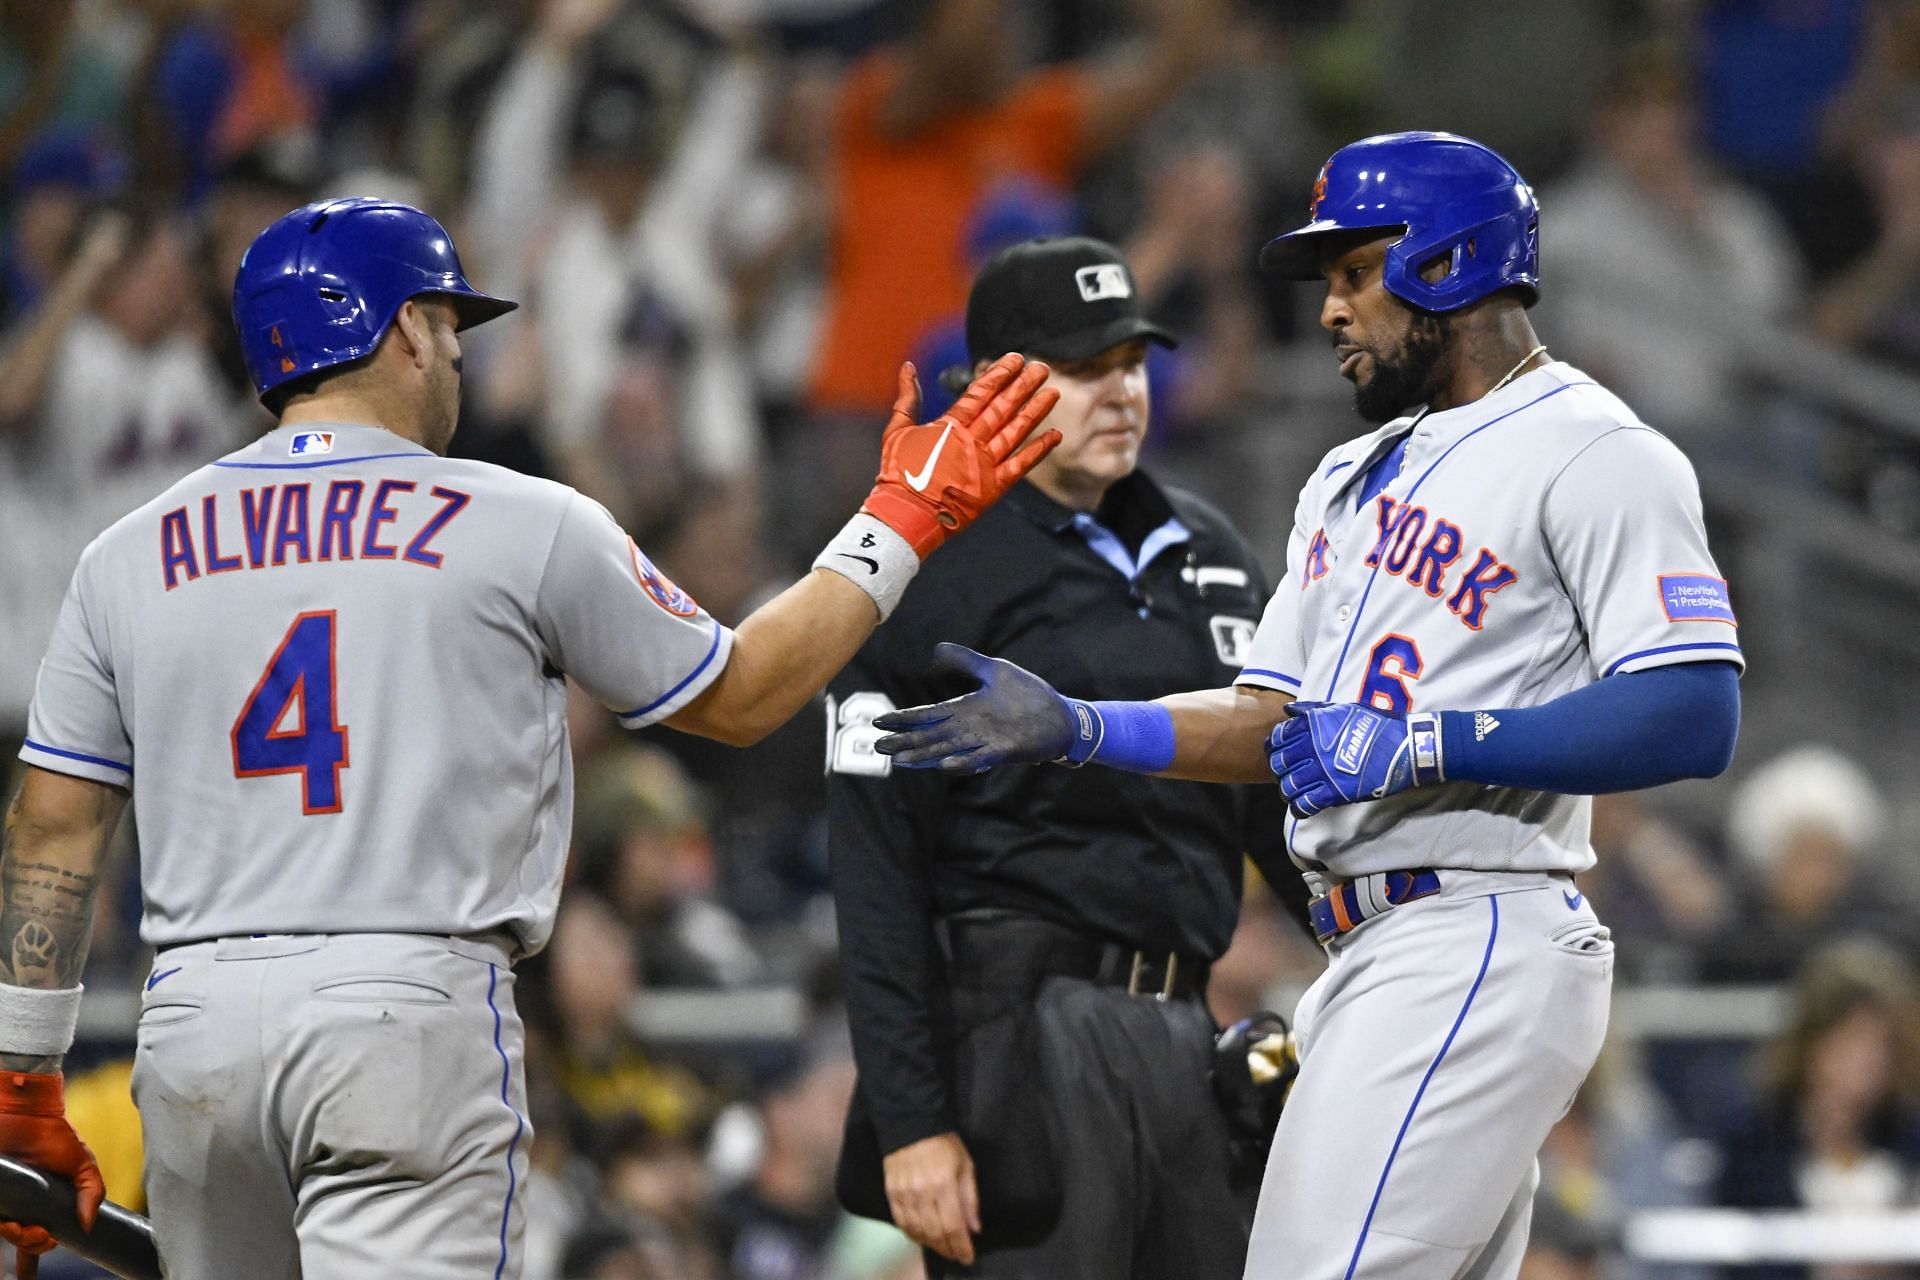 The New York Mets could benefit from Arraez contact hitting and defensive versatility.